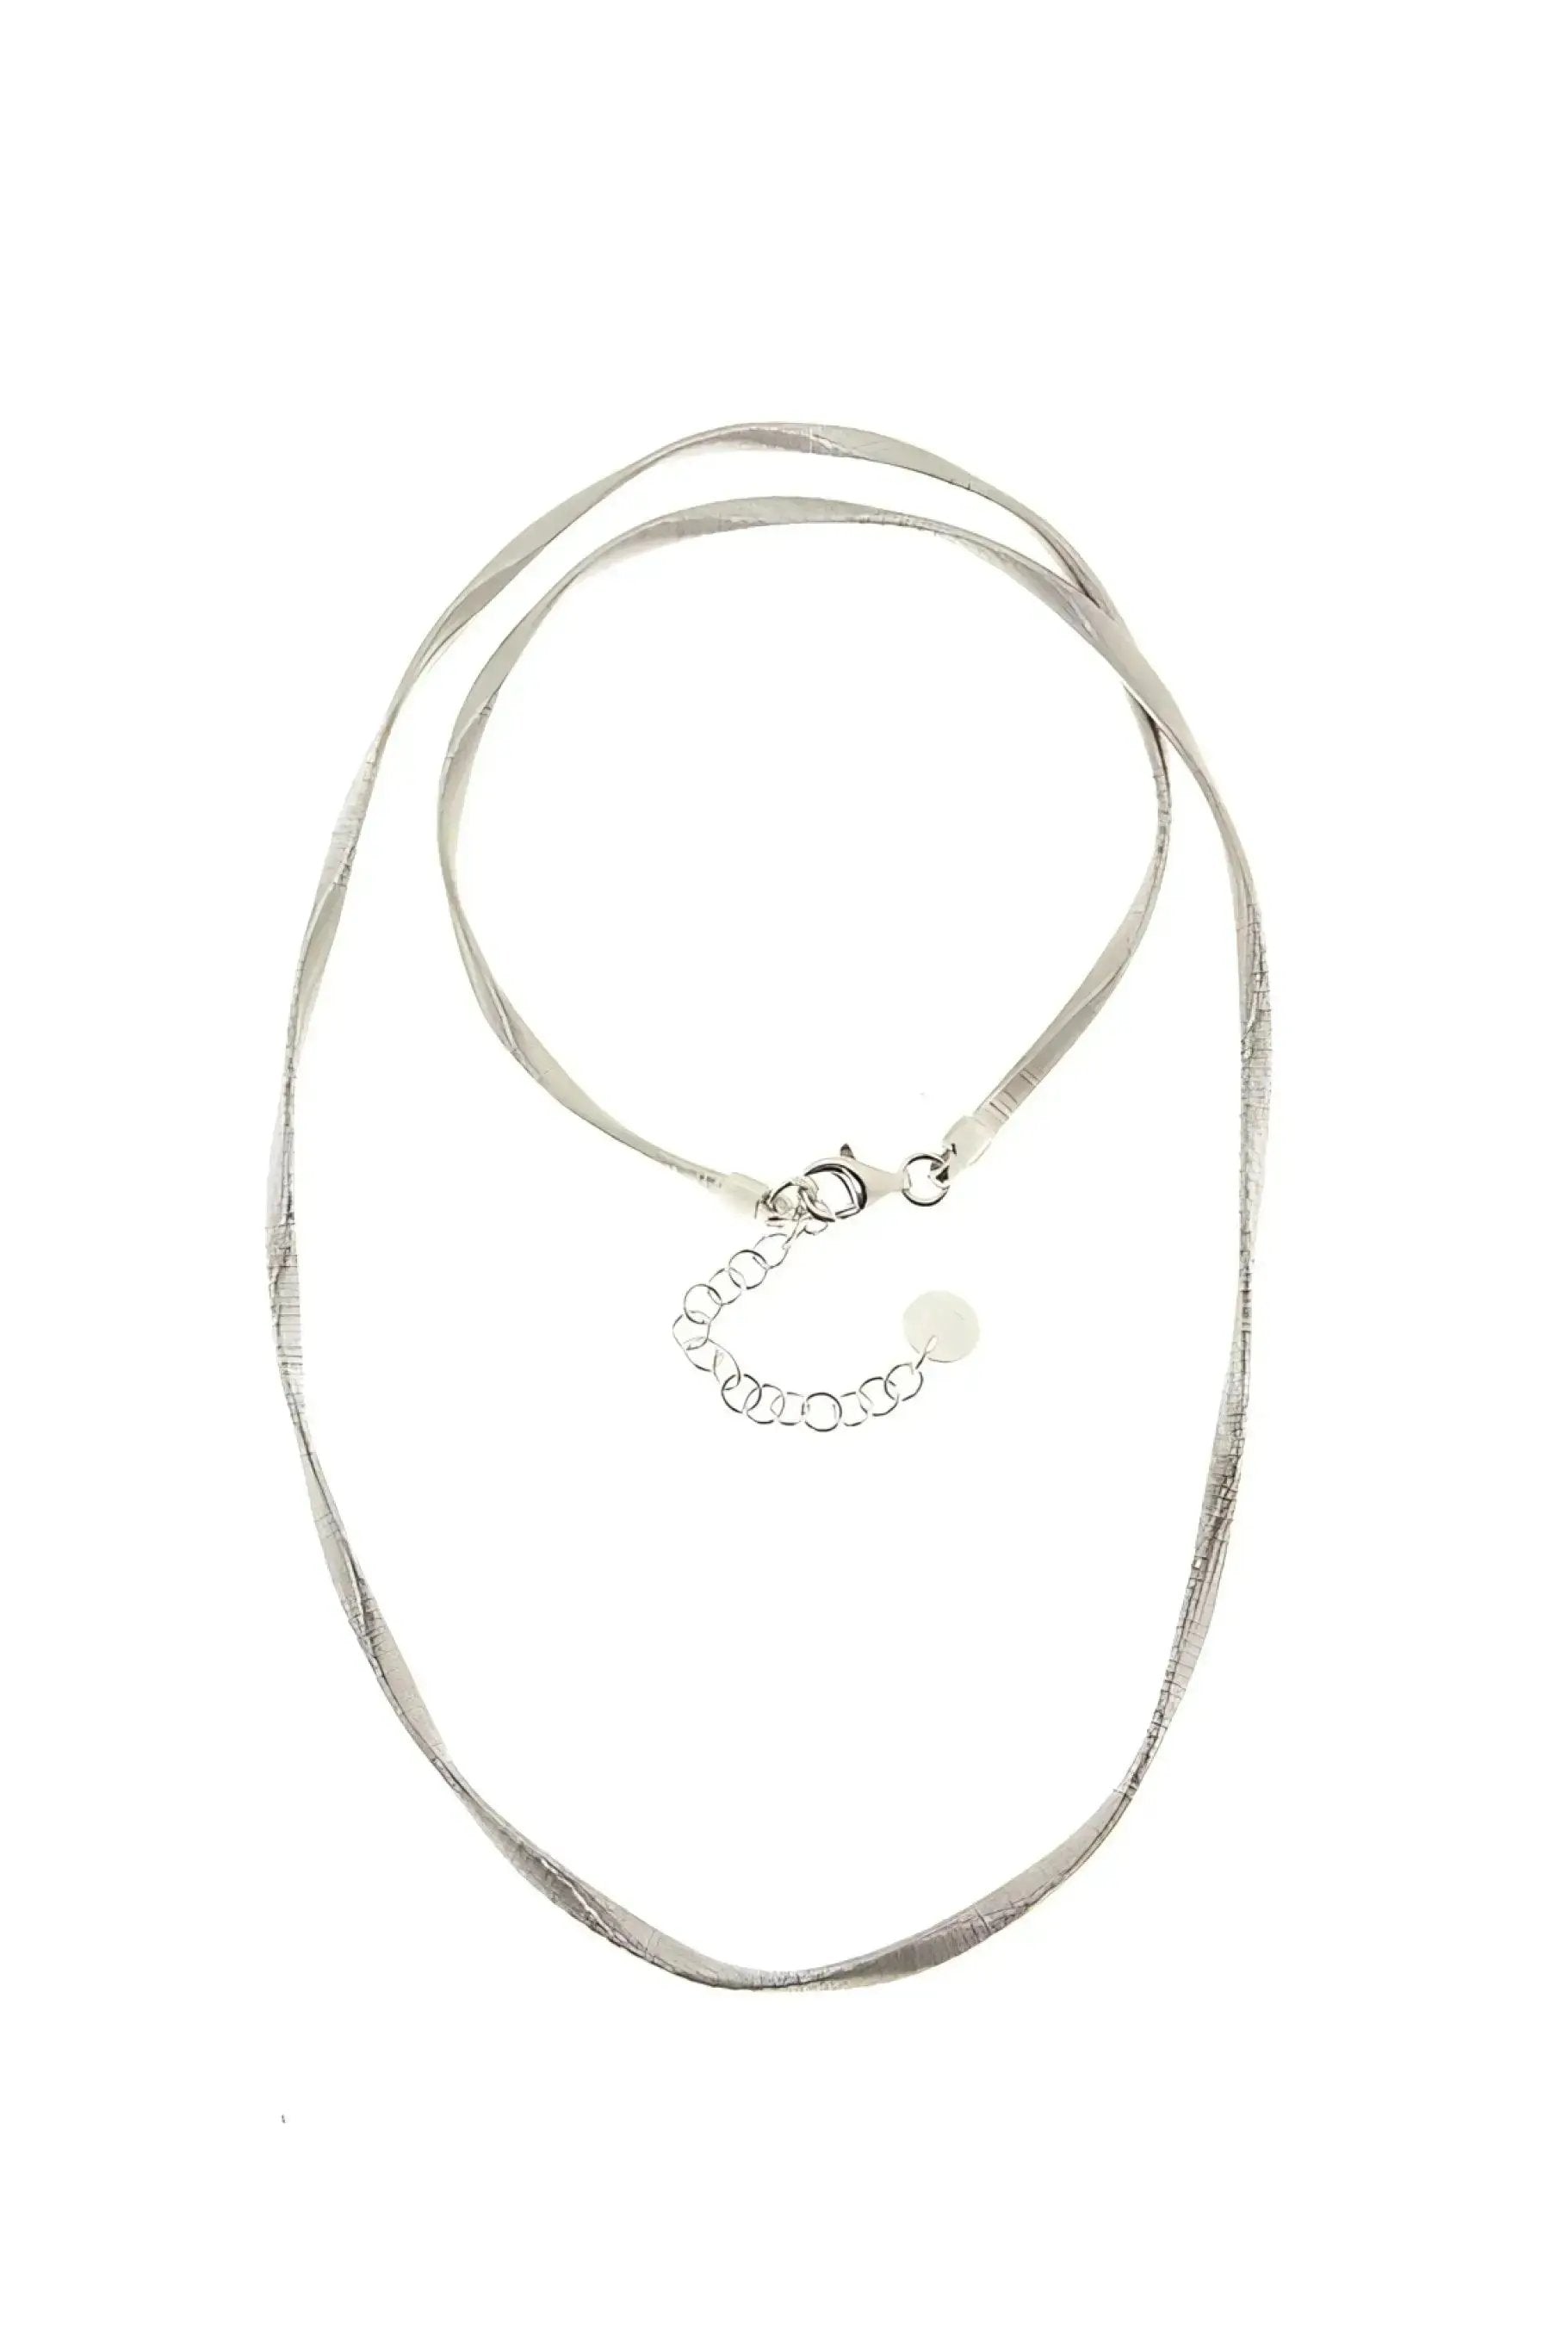 String Long - collana in argento 925 lunga